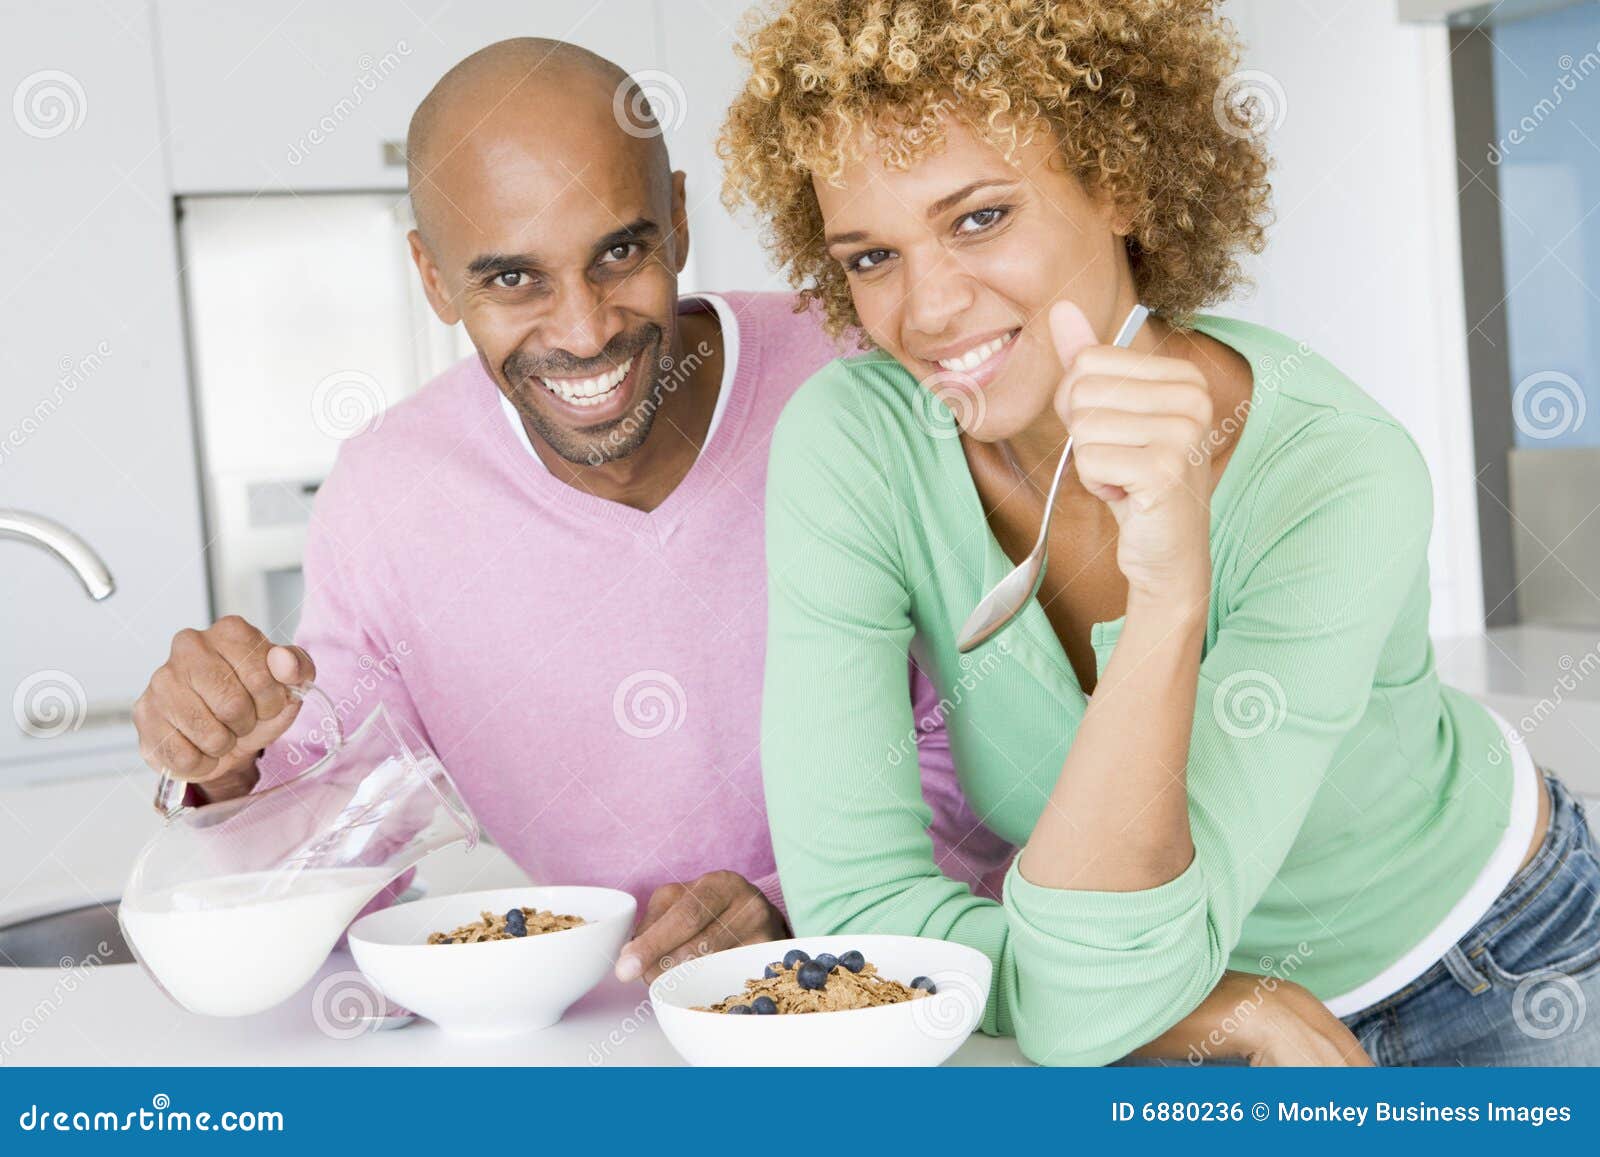 Husband And Wife Eating Breakfast Together Royalty Free 